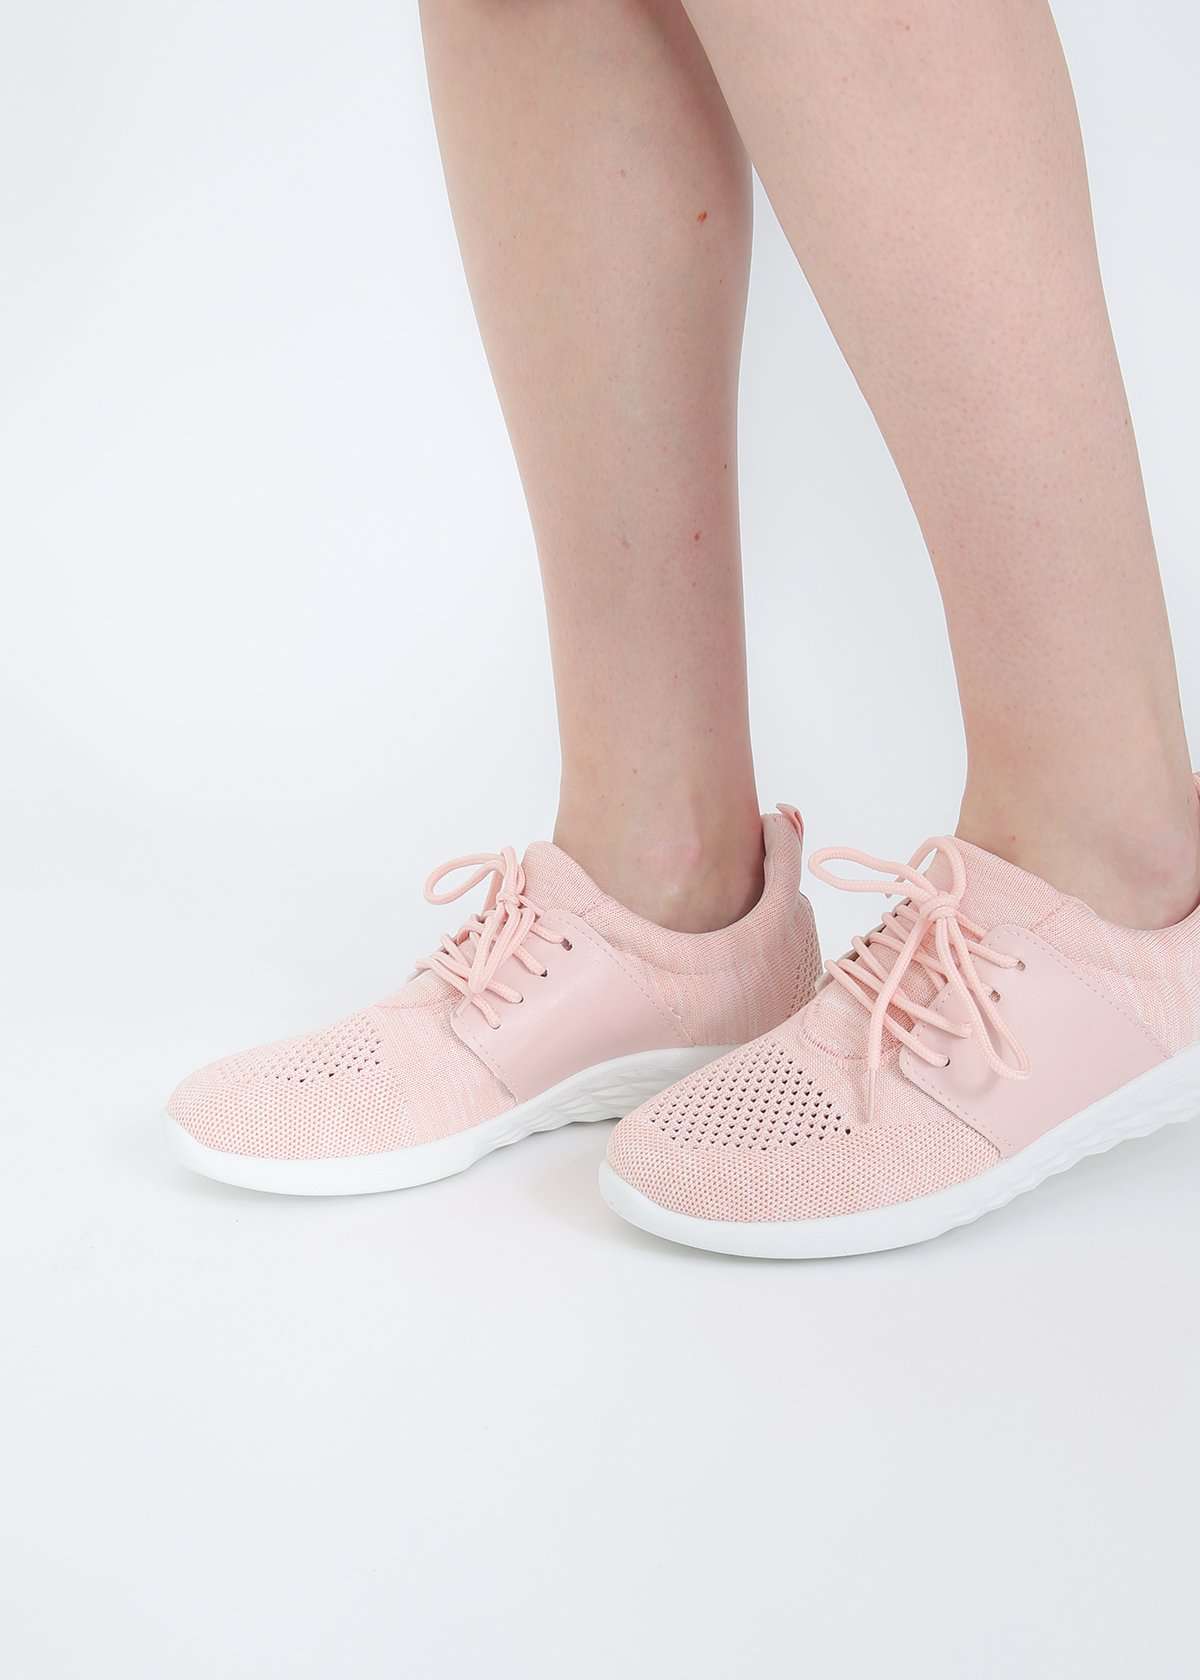 blush colored lace up women's sneaker